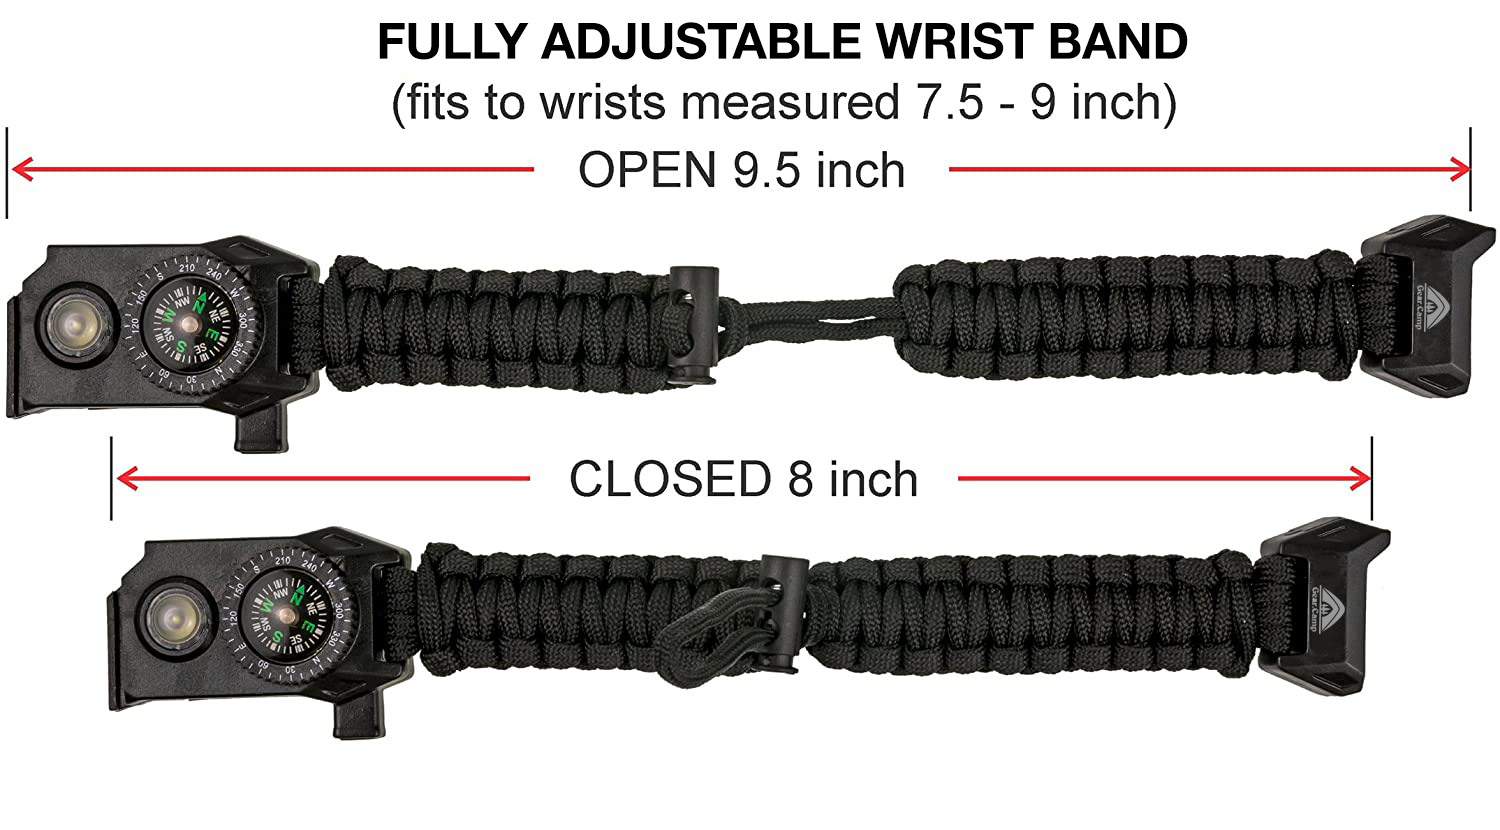 The Outdoorsman - Flashlight Survival Bracelet (Army Green) with